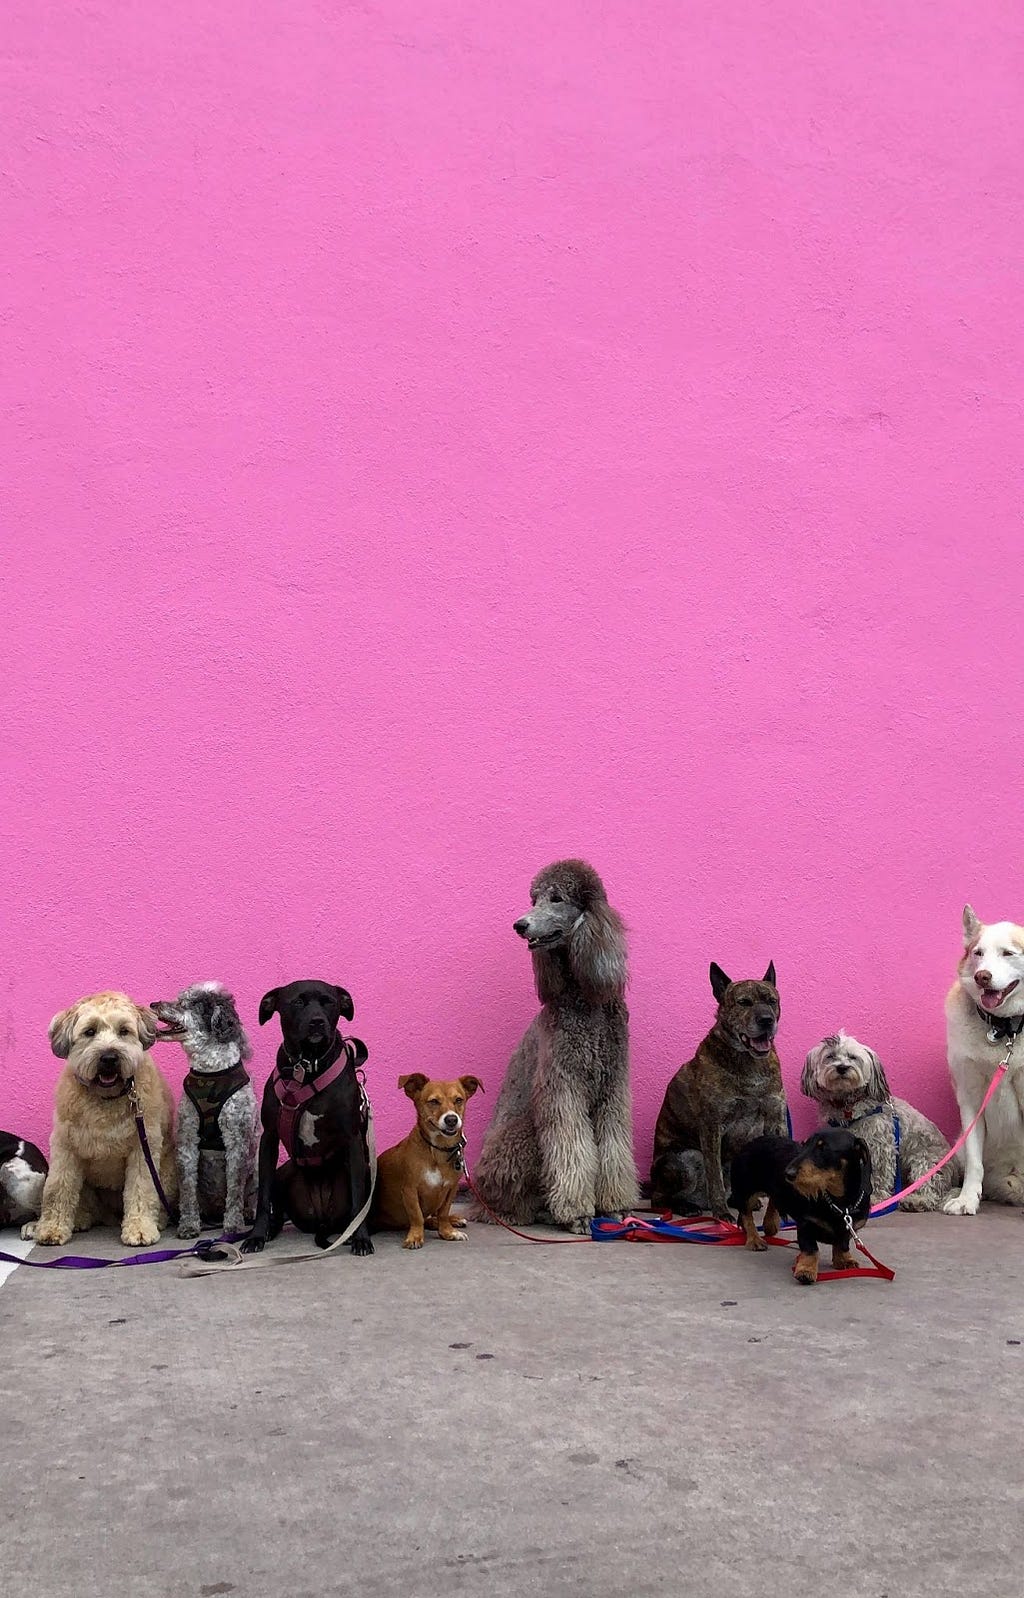 Many different dogs of all different breeds sitting in front of a pink wall